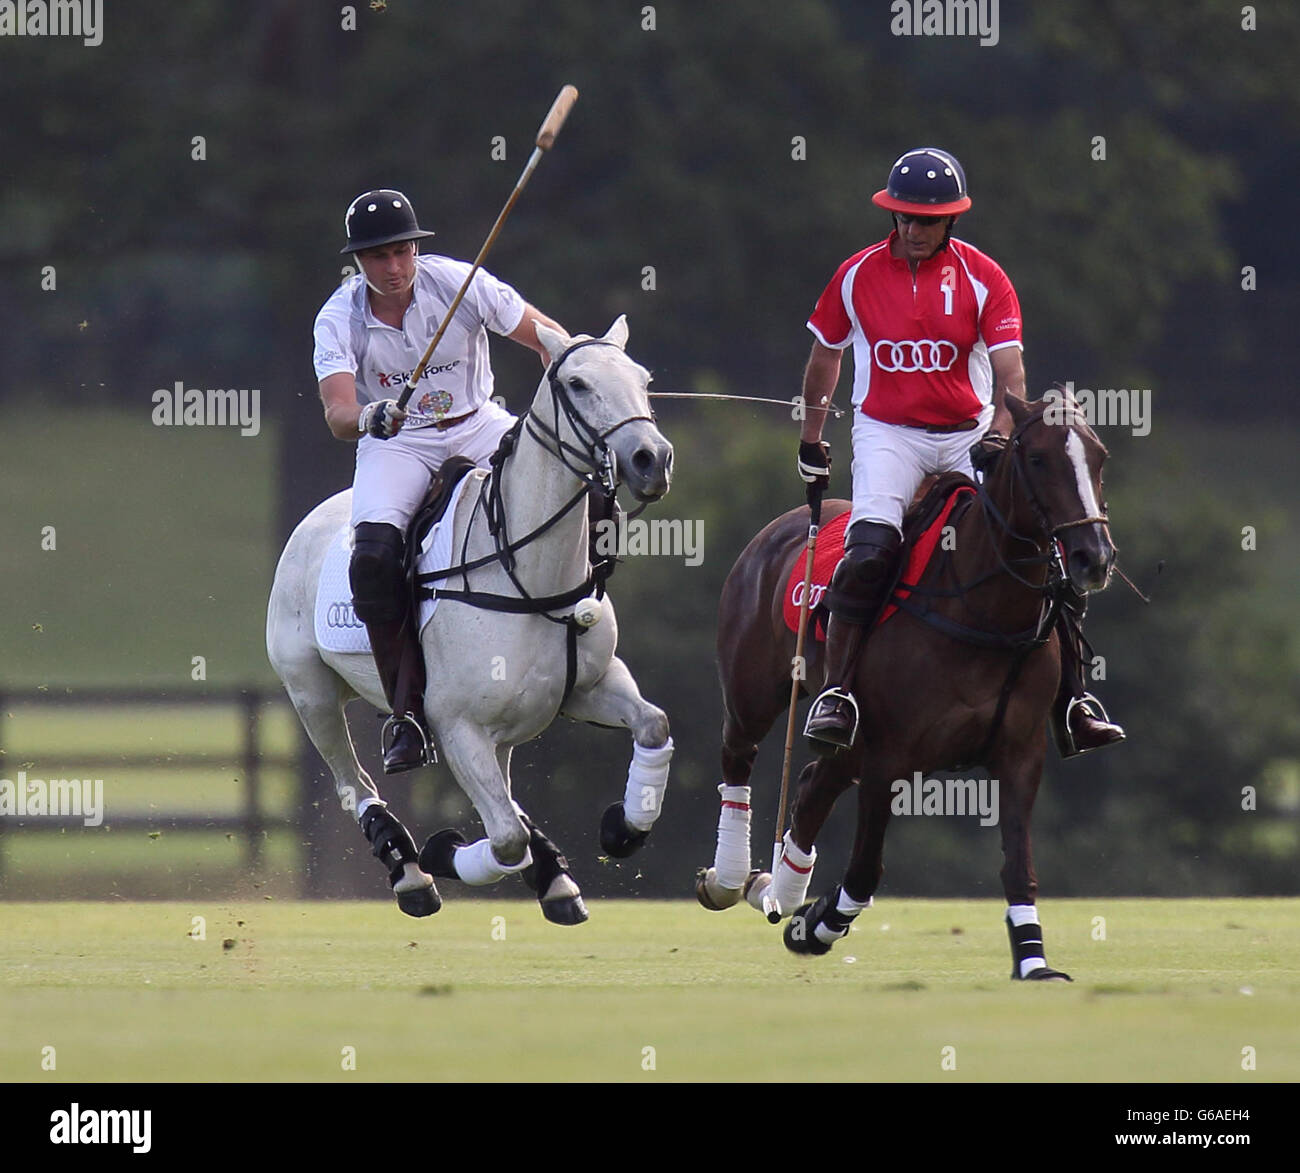 Prince William plays in the Audi Polo Challenge at Cowarth Park, Ascot, Berkshire. The Prince played in the same team as his brother Harry in aid of the Charities SkillForce and the Royal Marsden Cancer Charity. Stock Photo